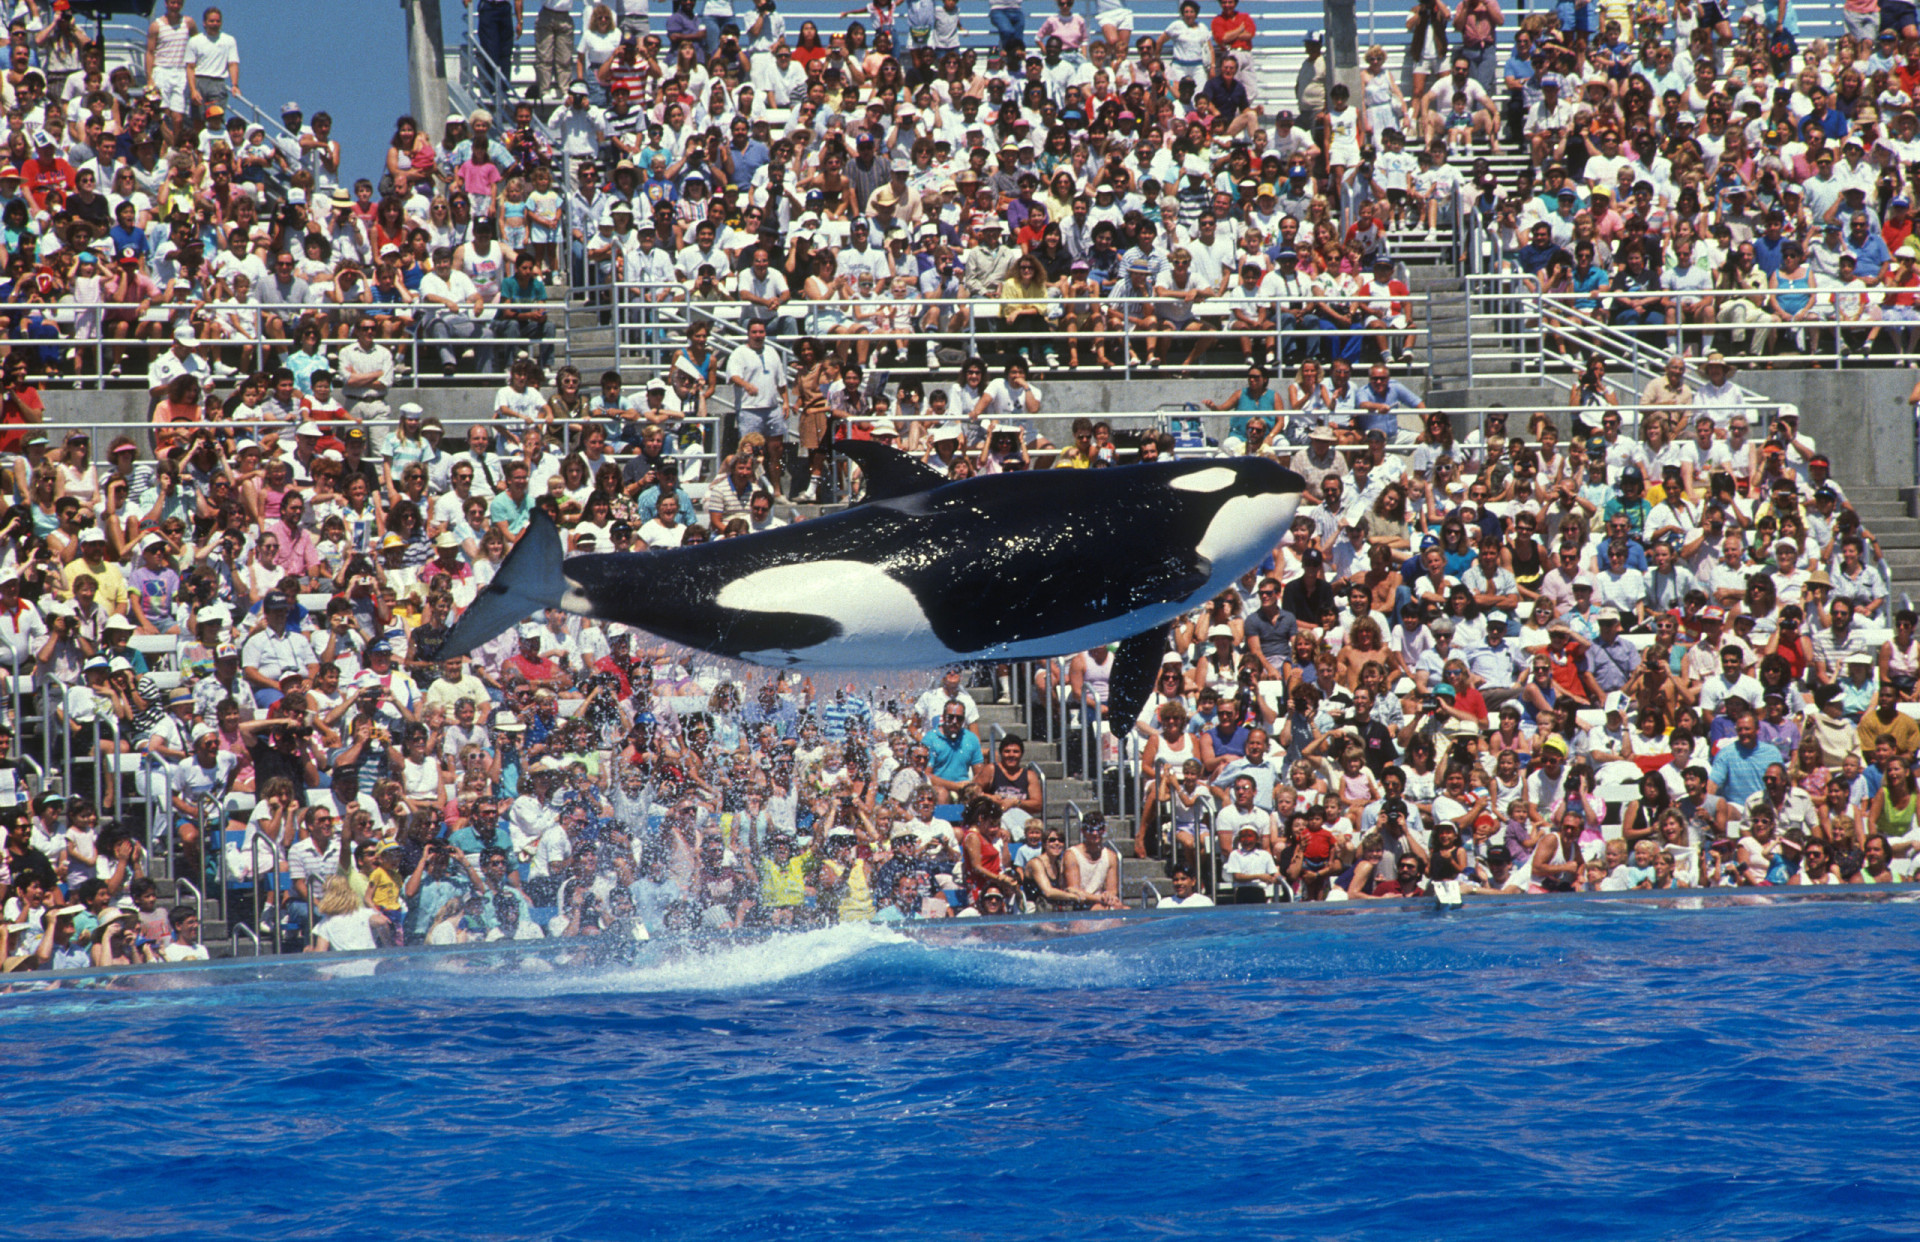 <p>Before we start to judge orcas, it's important to remember our own species is also notorious for its members who kill for sport, vengefully sink ships, kill our own kind, exploit other animals, and sit all too comfortably at the top of the food chain.</p><p>Sources: (National Geographic) (Live Science) (The Atlantic) (The Guardian) (BBC Earth)</p><p>See also: <a href="https://www.starsinsider.com/lifestyle/451131/the-worlds-smartest-animals">The world's smartest animals</a></p><p><a href="https://www.msn.com/en-us/community/channel/vid-7xx8mnucu55yw63we9va2gwr7uihbxwc68fxqp25x6tg4ftibpra?cvid=94631541bc0f4f89bfd59158d696ad7e">Follow us and access great exclusive content every day</a></p>